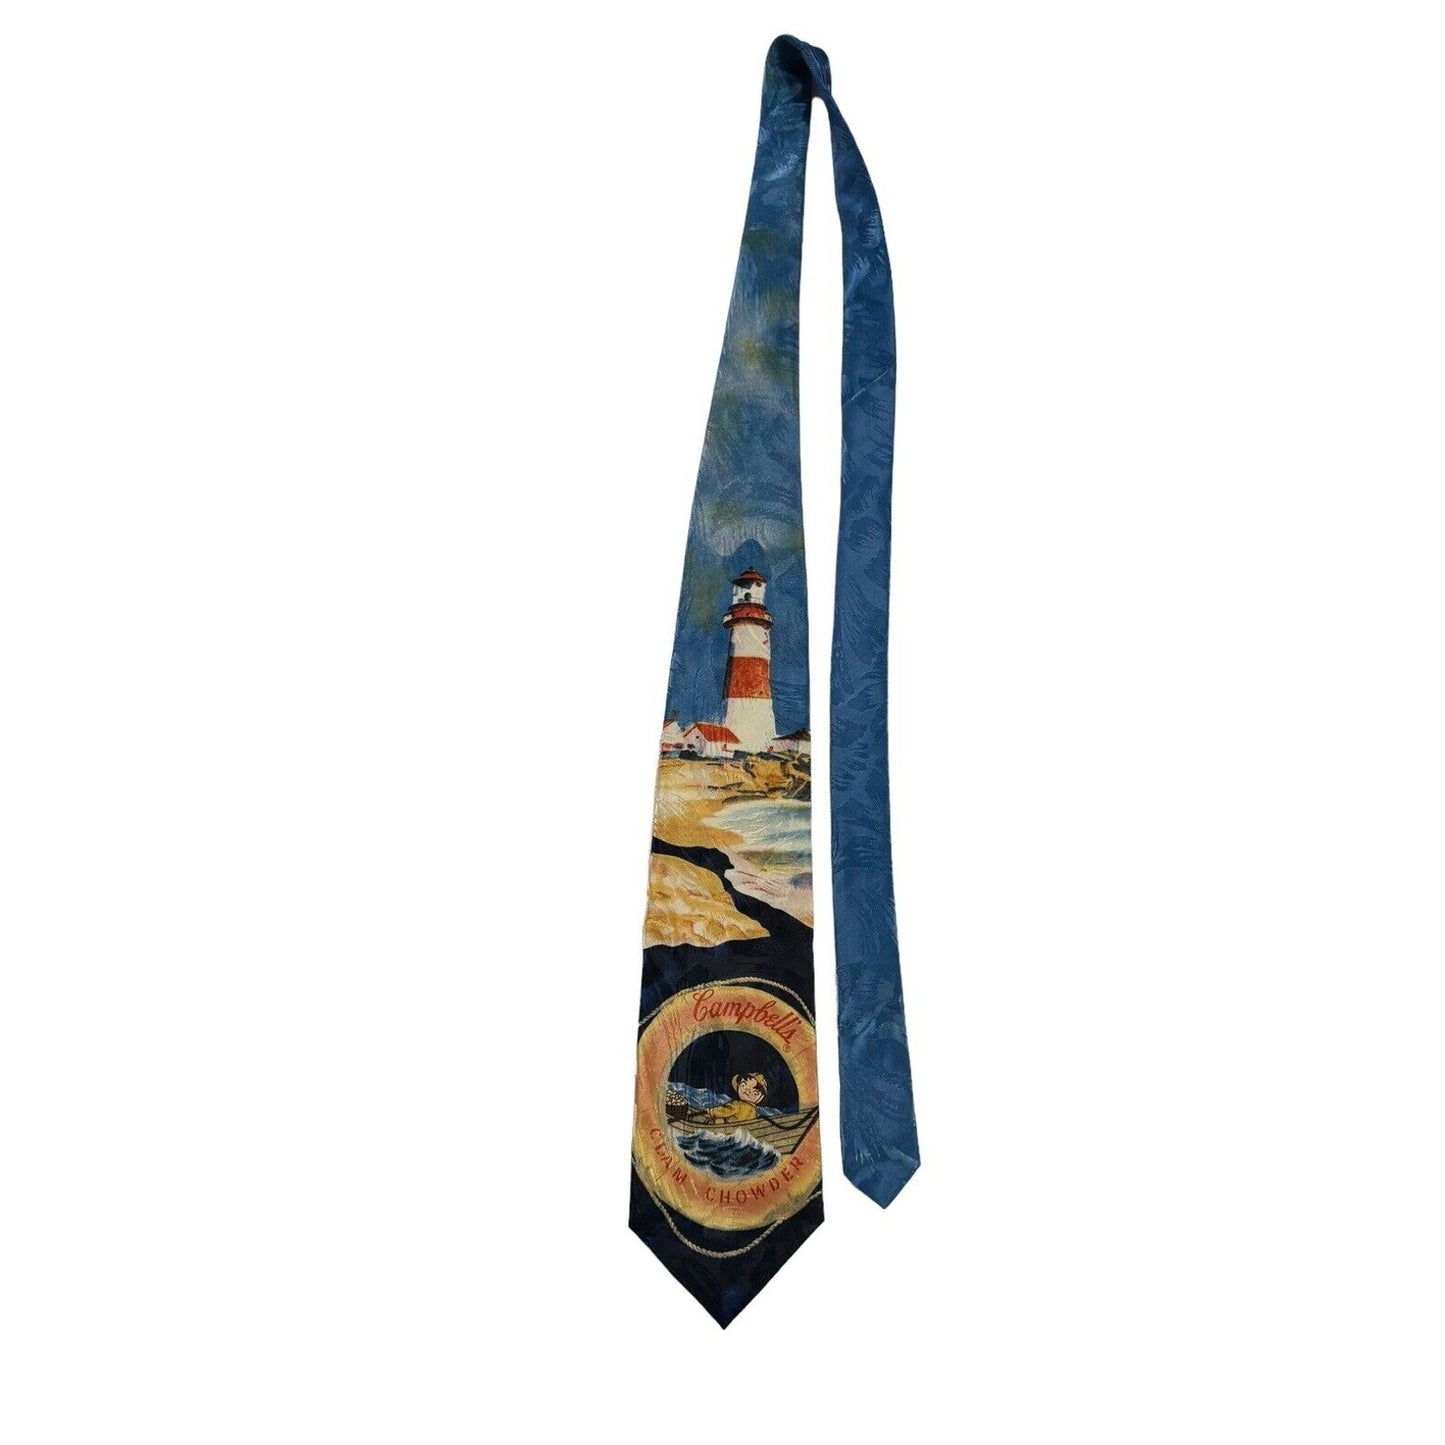 Campbell’s Soup Clam Chowder Life Preserver Lighthouse Nautical Vintage Necktie